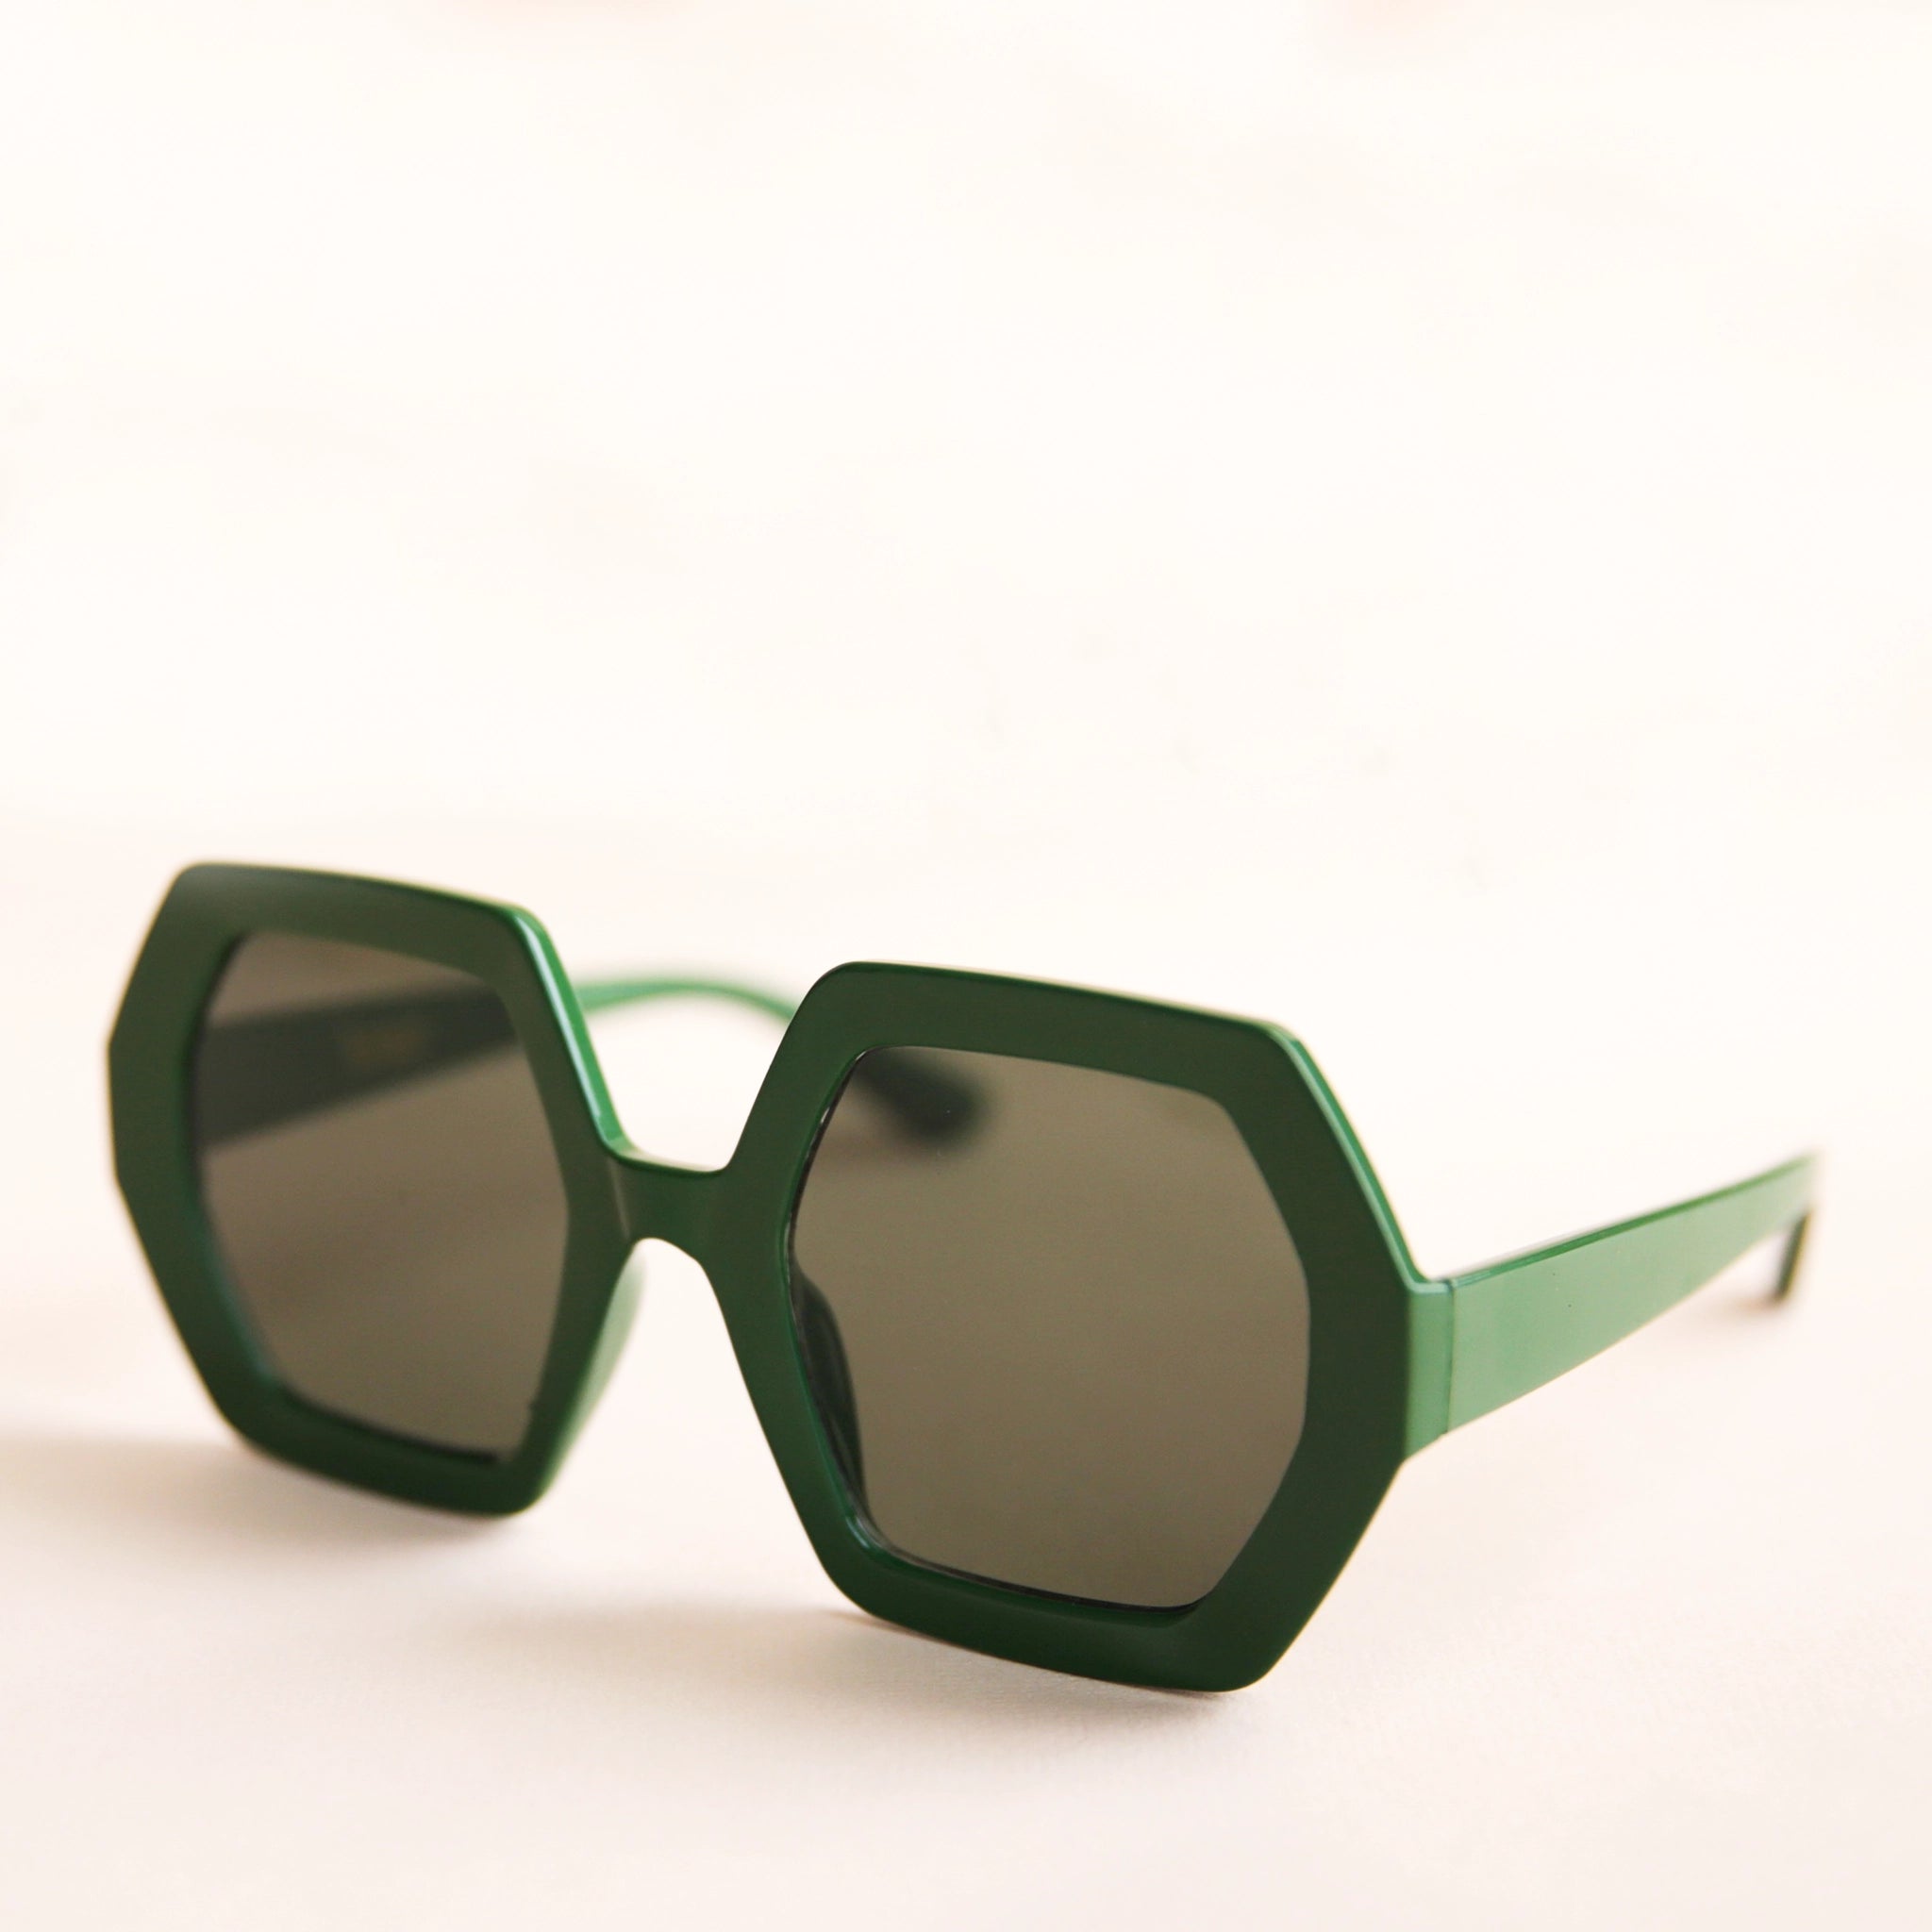 On a neutral background is a pair of hexagon shaped sunglasses in an emerald green color.